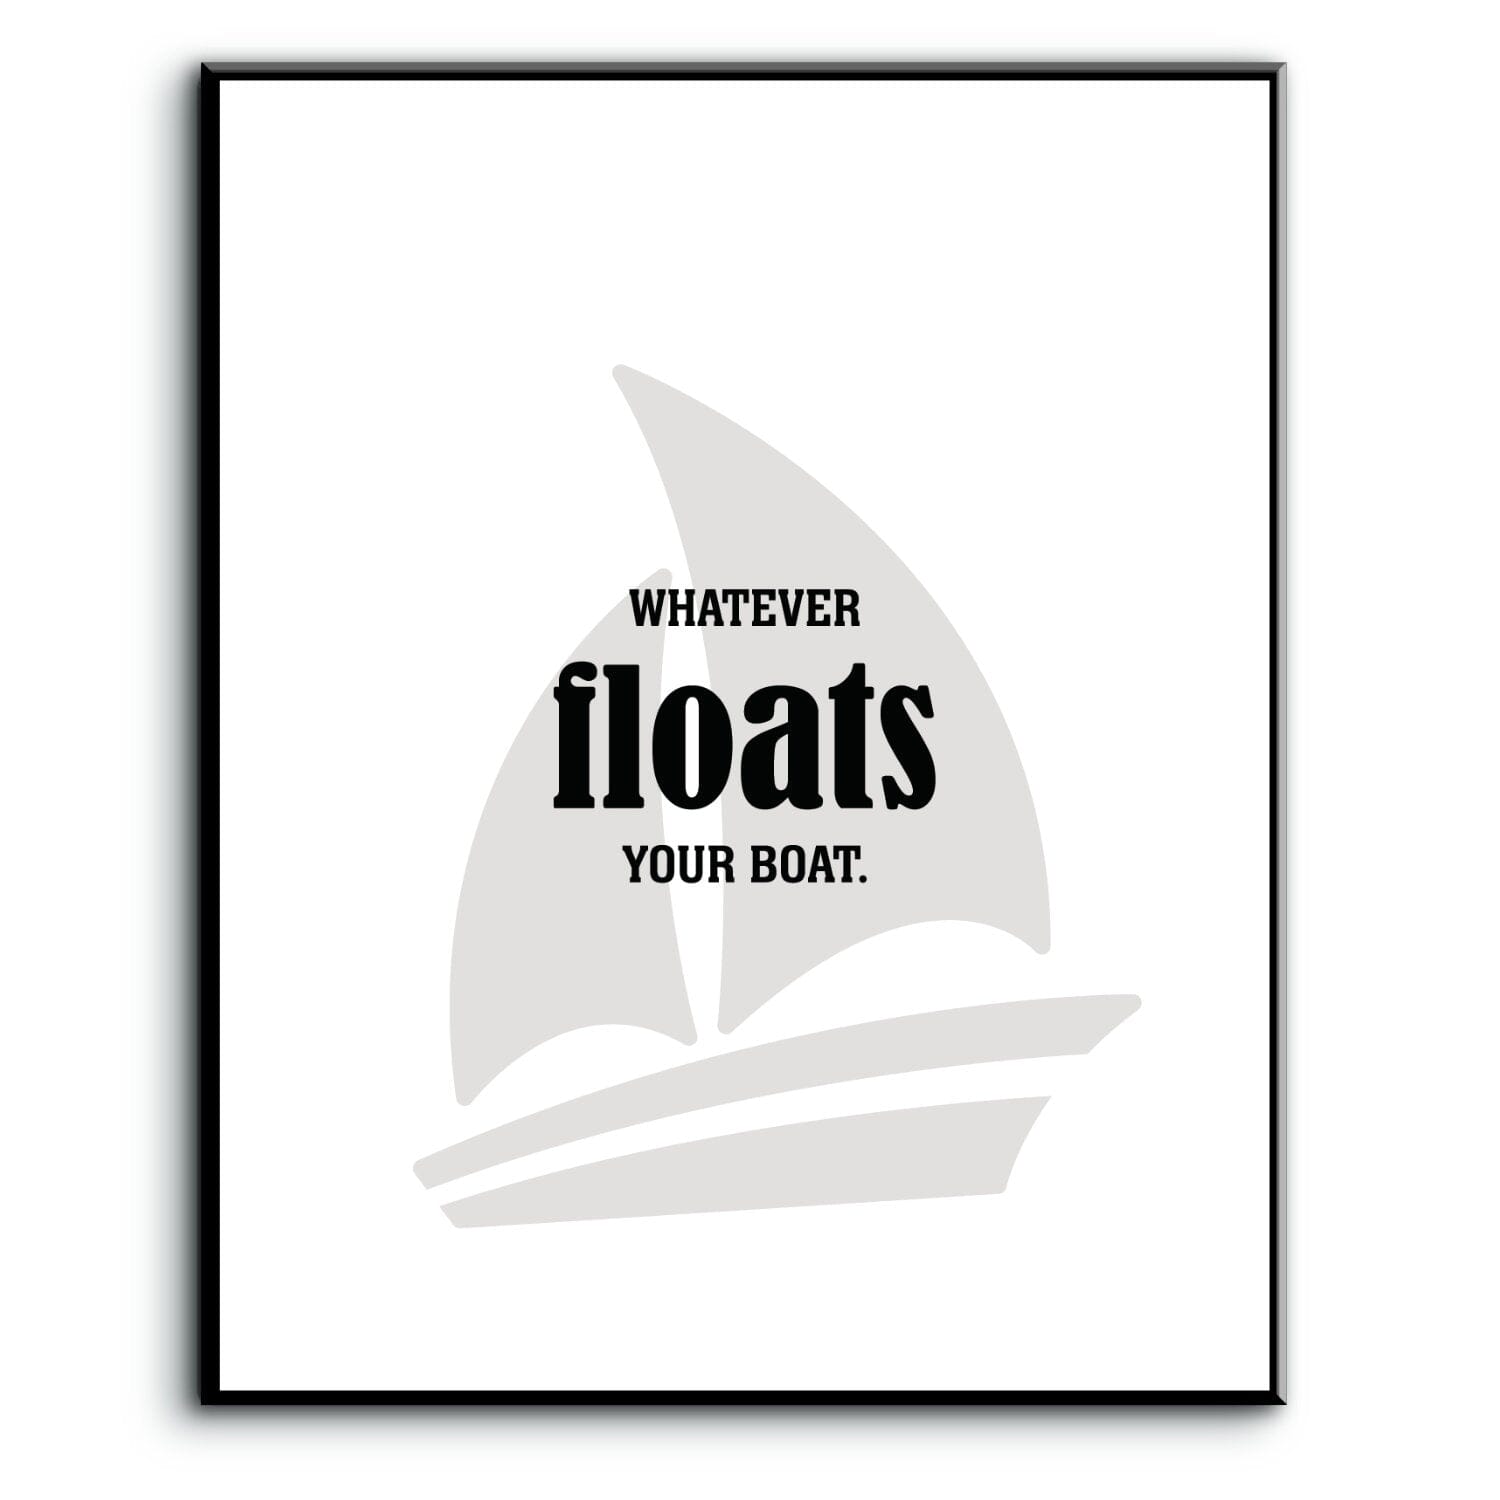 Whatever Floats Your Boat - Wise and Witty Wall Print Art Wise and Wiseass Quotes Song Lyrics Art 8x10 Plaque Mount 